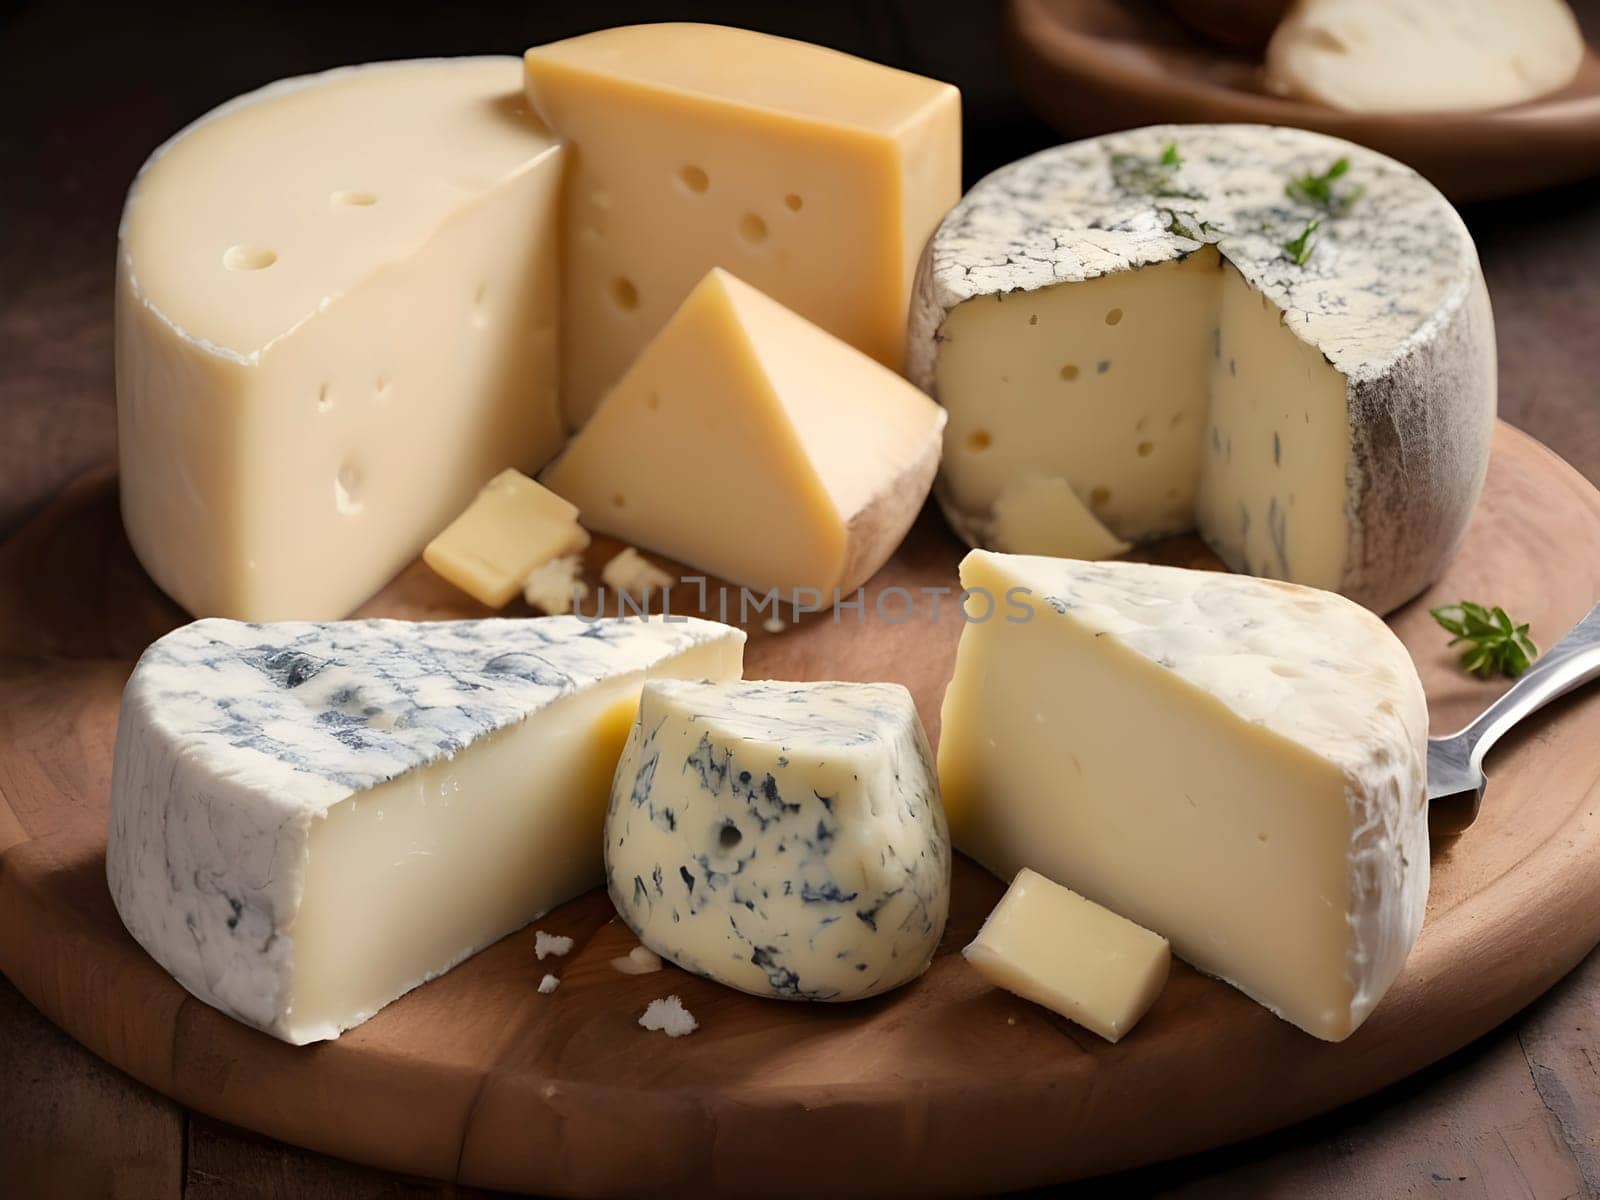 Fromage Fusion: A Blend of Irresistible Cheeses to Delight the Palate.